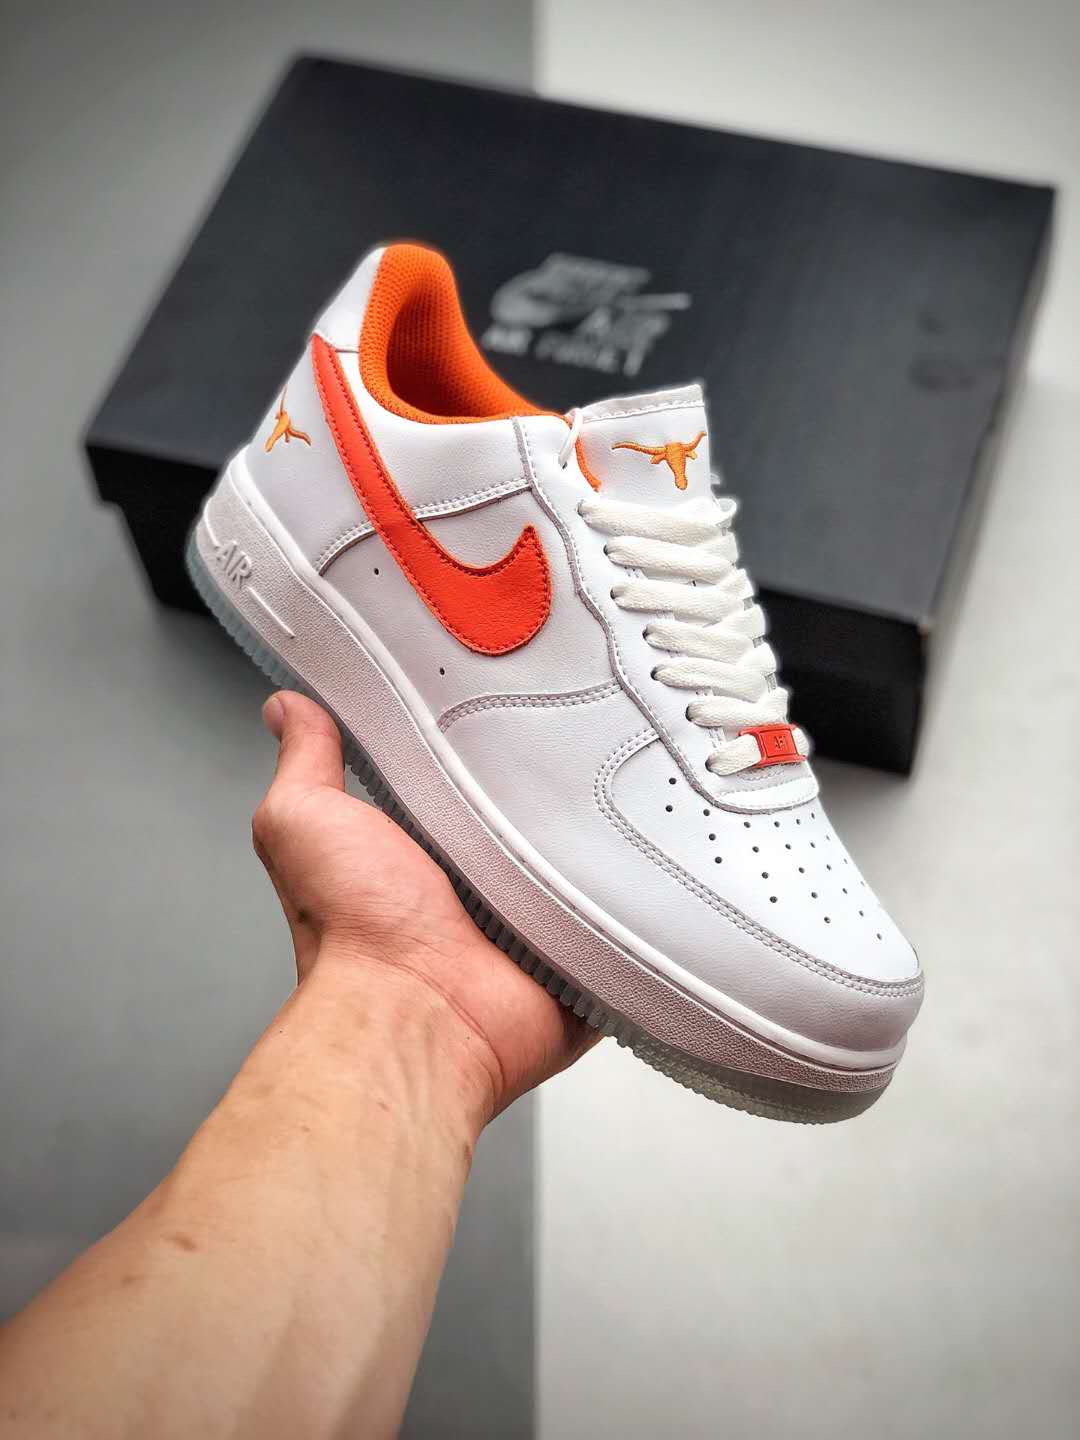 Nike Air Force 1 Low White Orange CJ8596-103 - Classic Design with Vibrant Accents